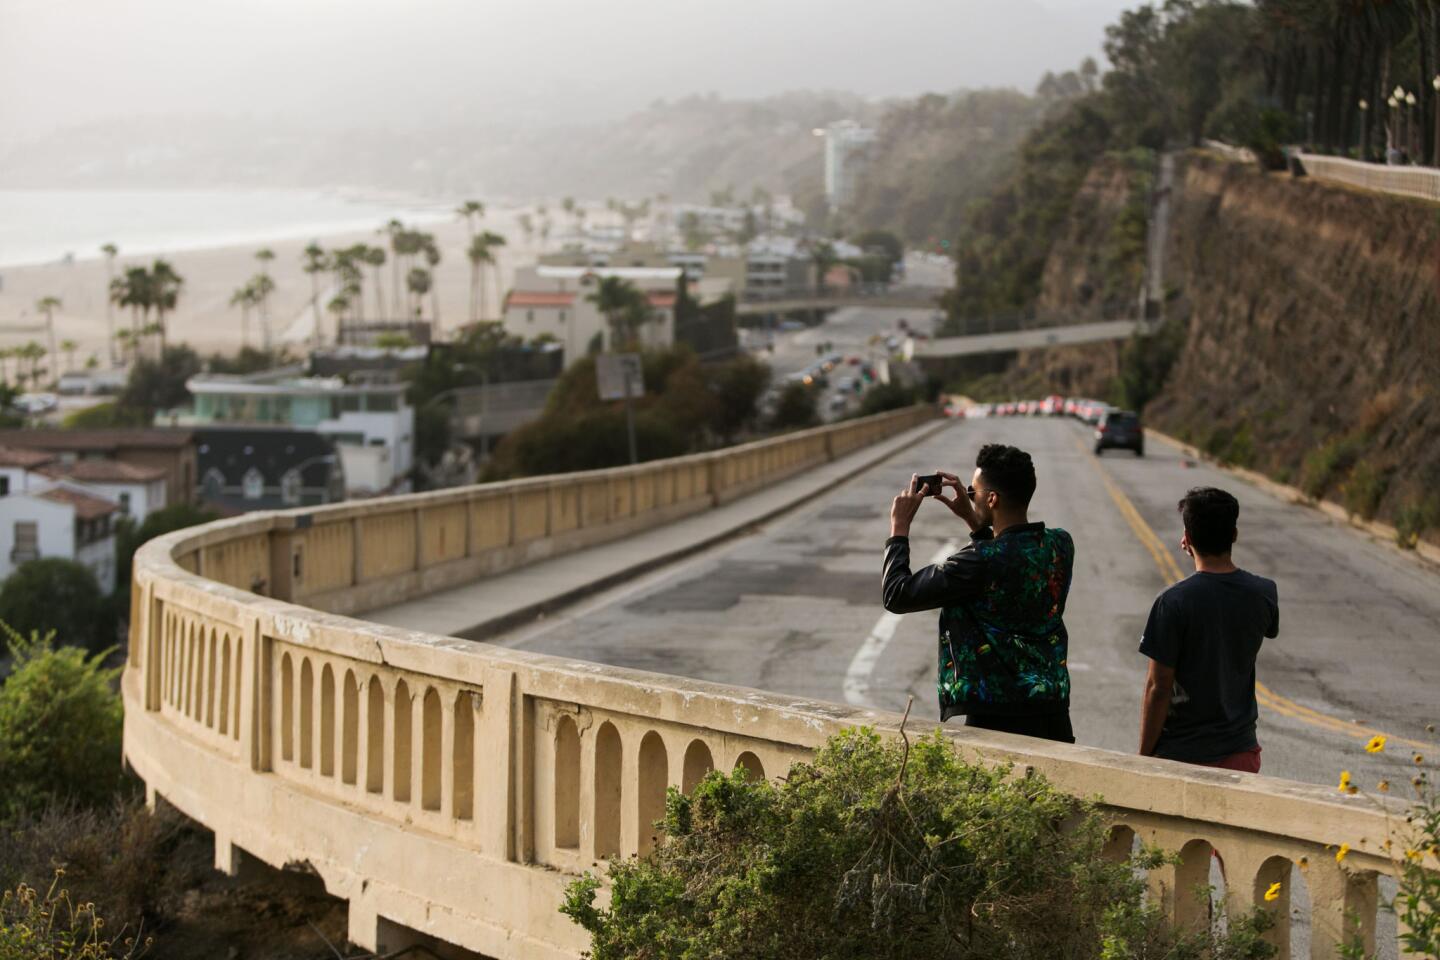 A man takes a picture from the California Incline in Santa Monica on Wednesday.